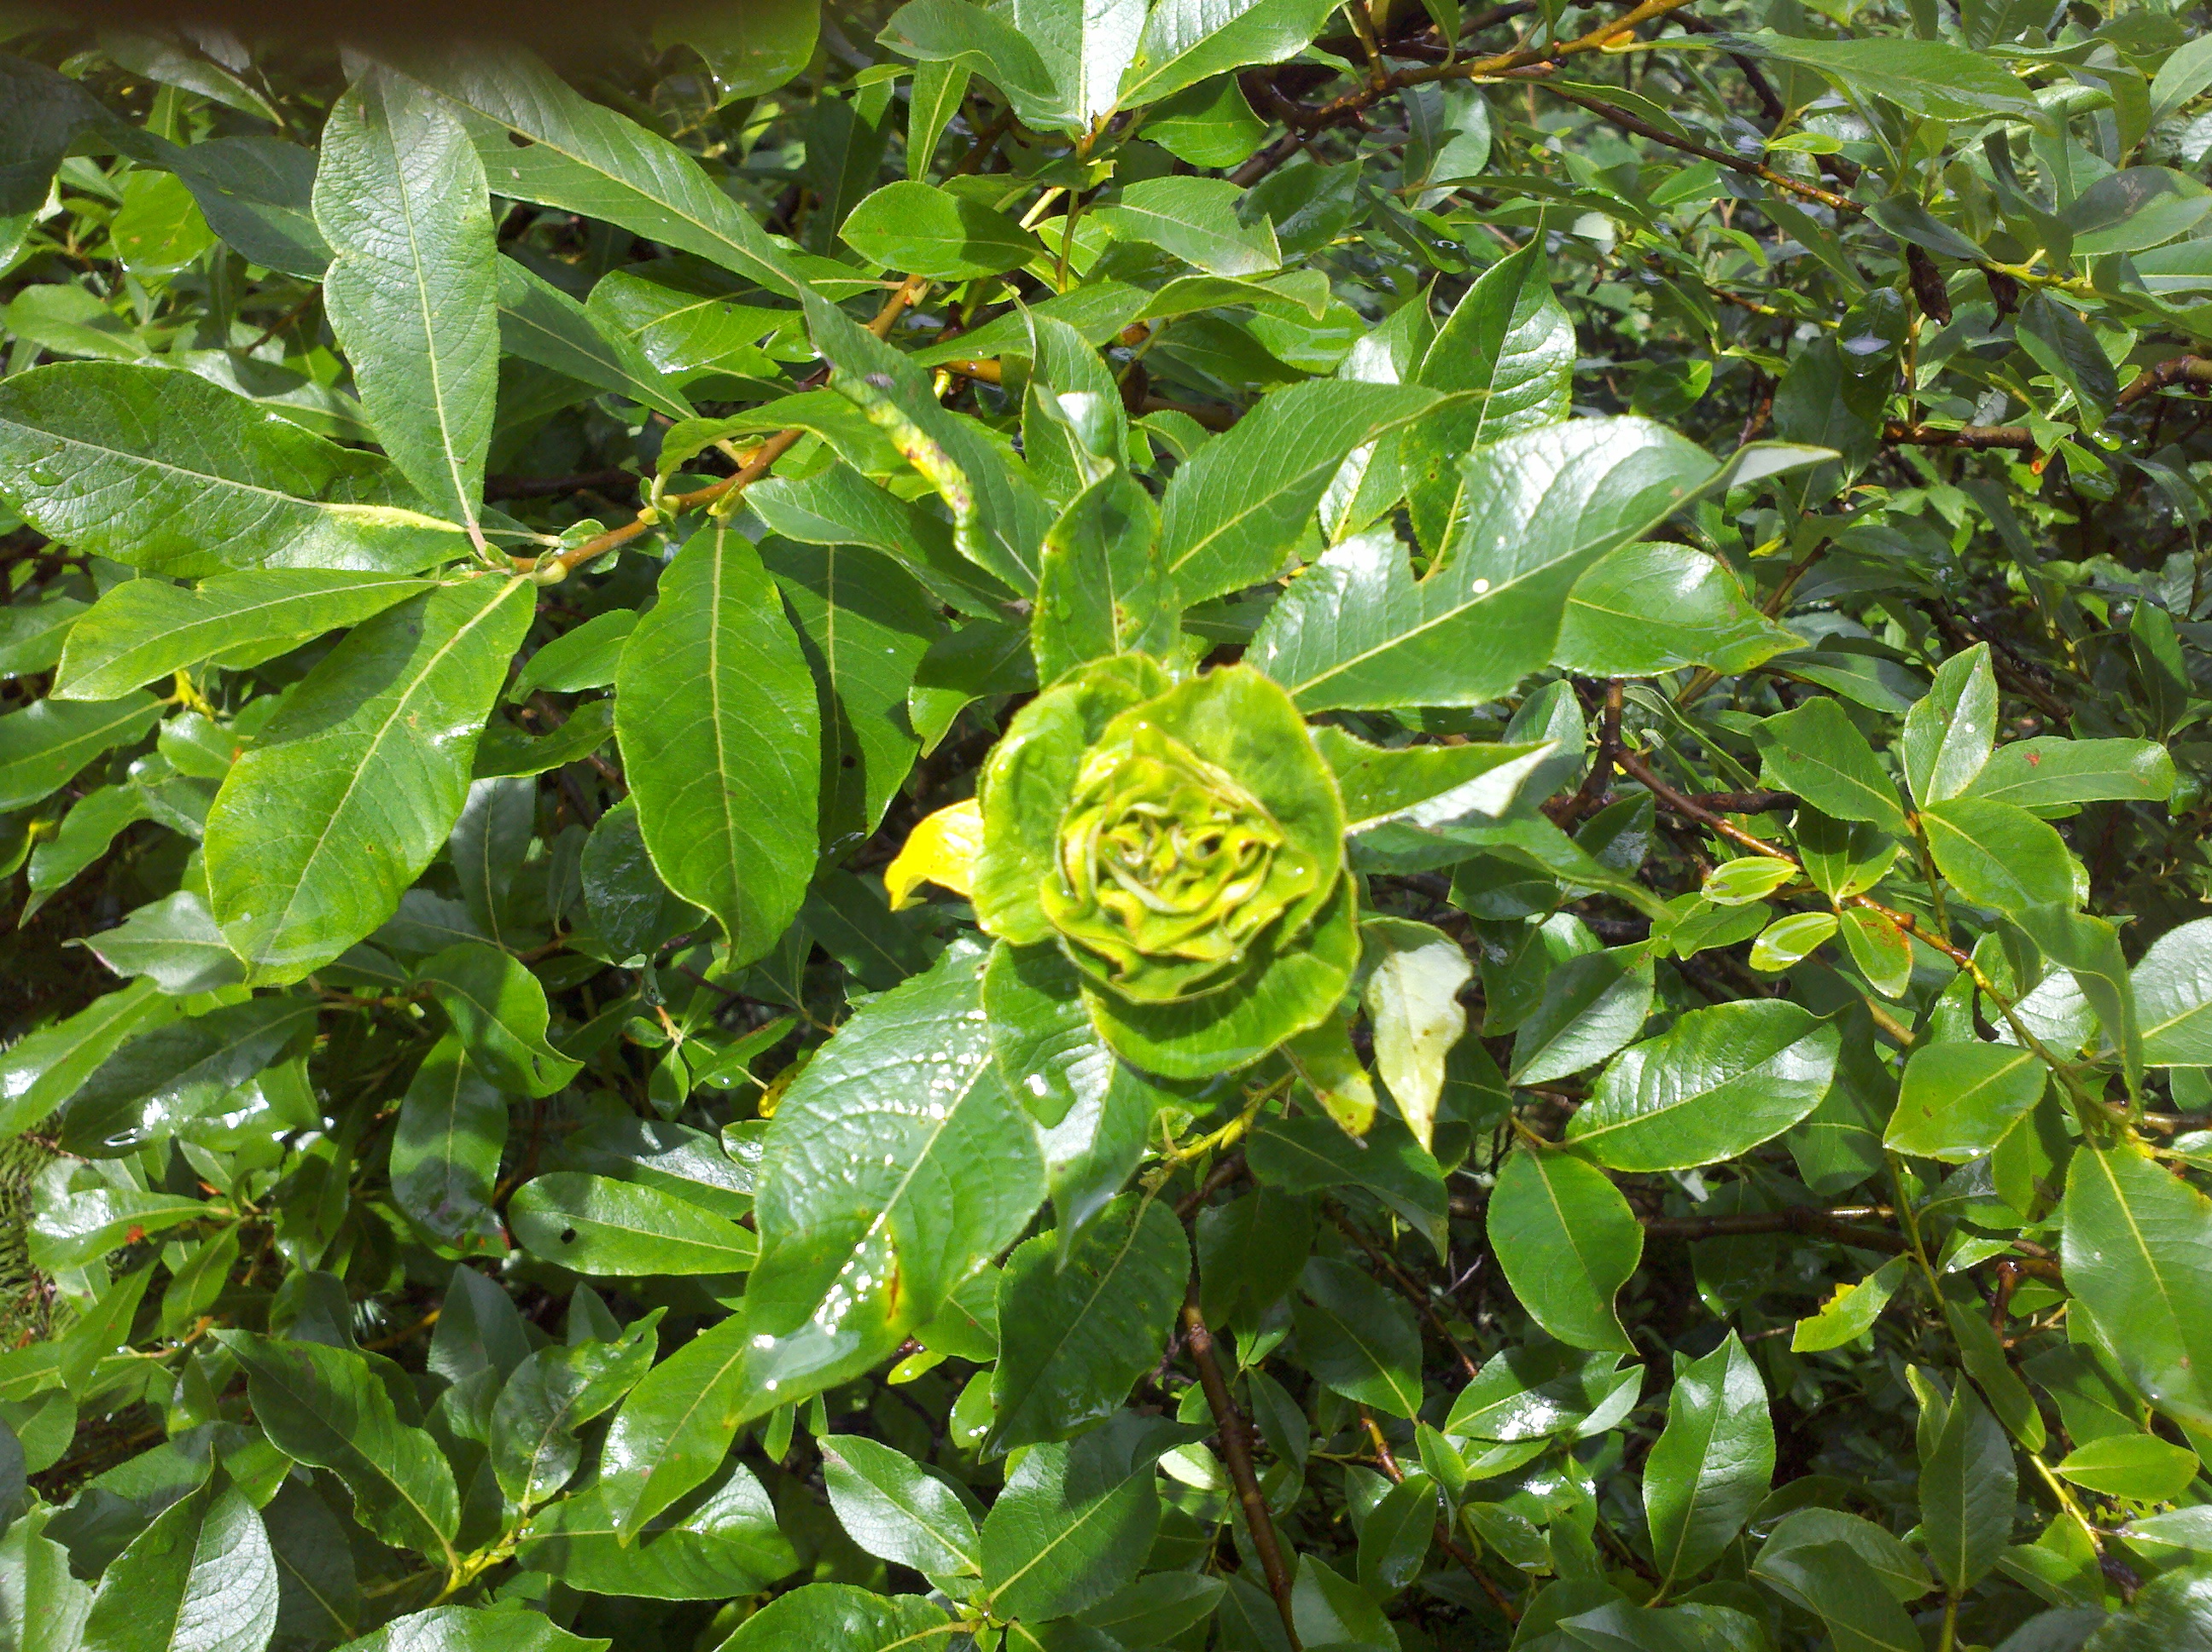 Who knows this green flower?